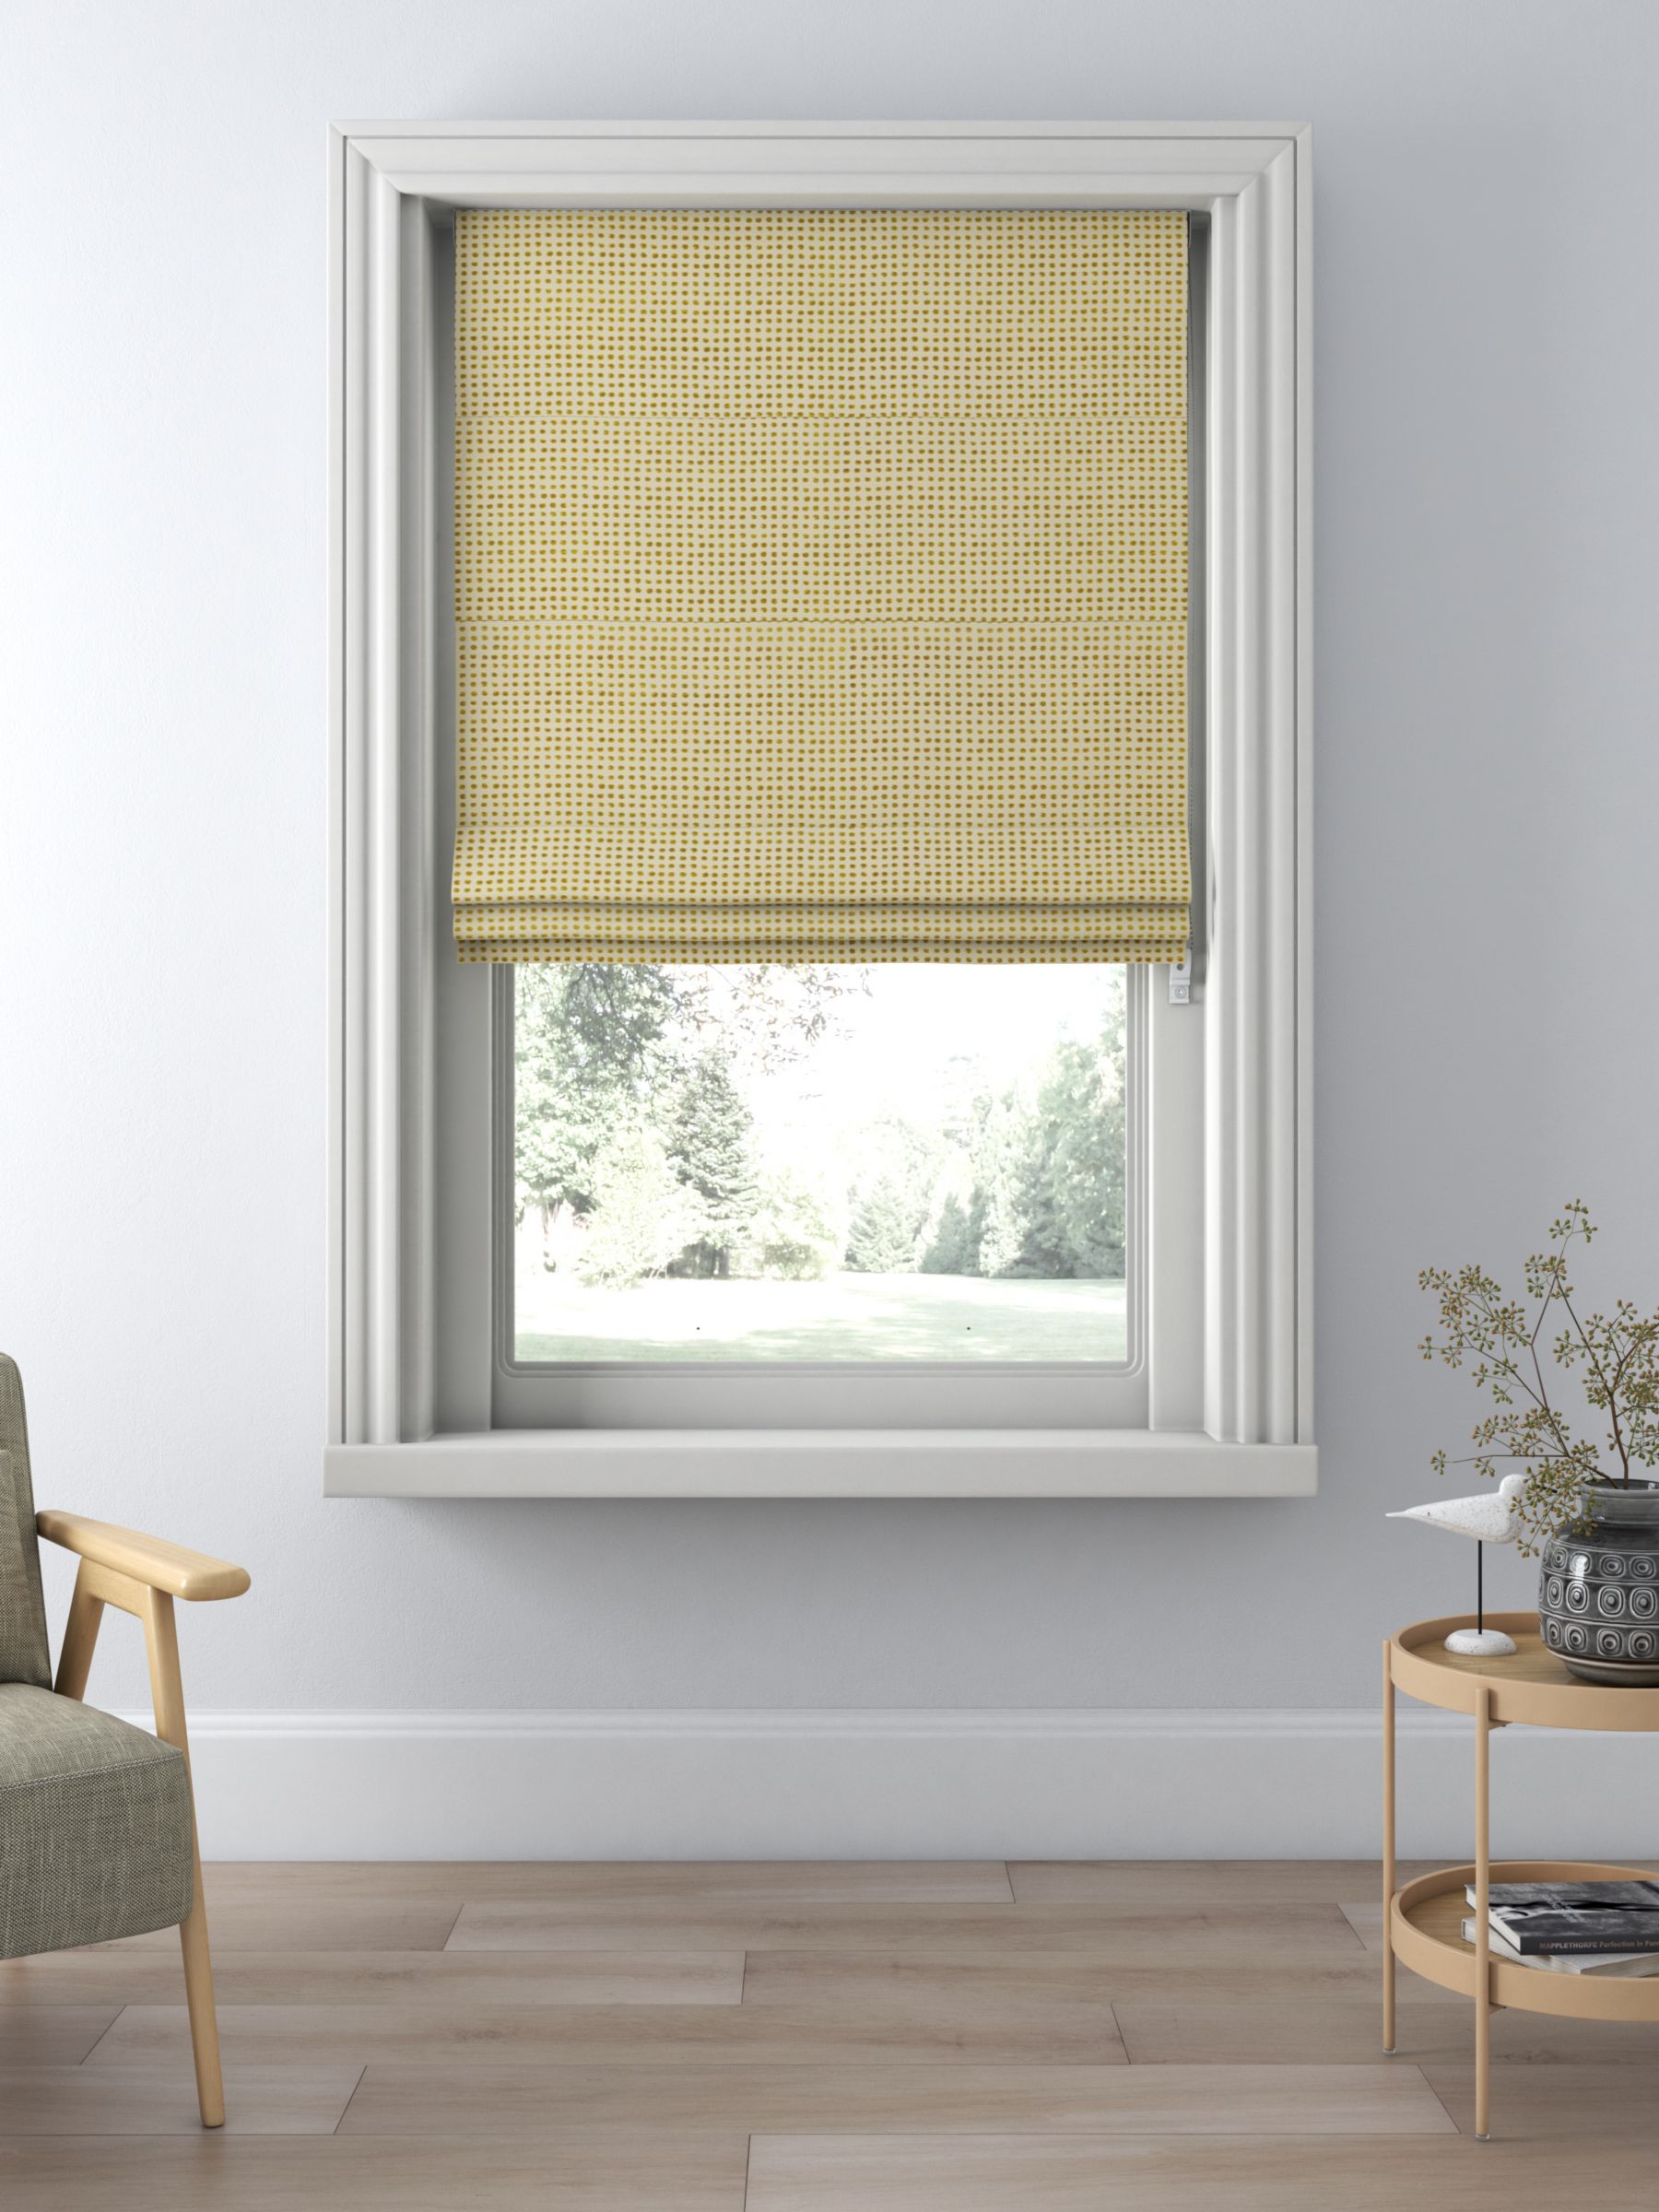 Harlequin Polka Made to Measure Curtains, Mustard/Neutral